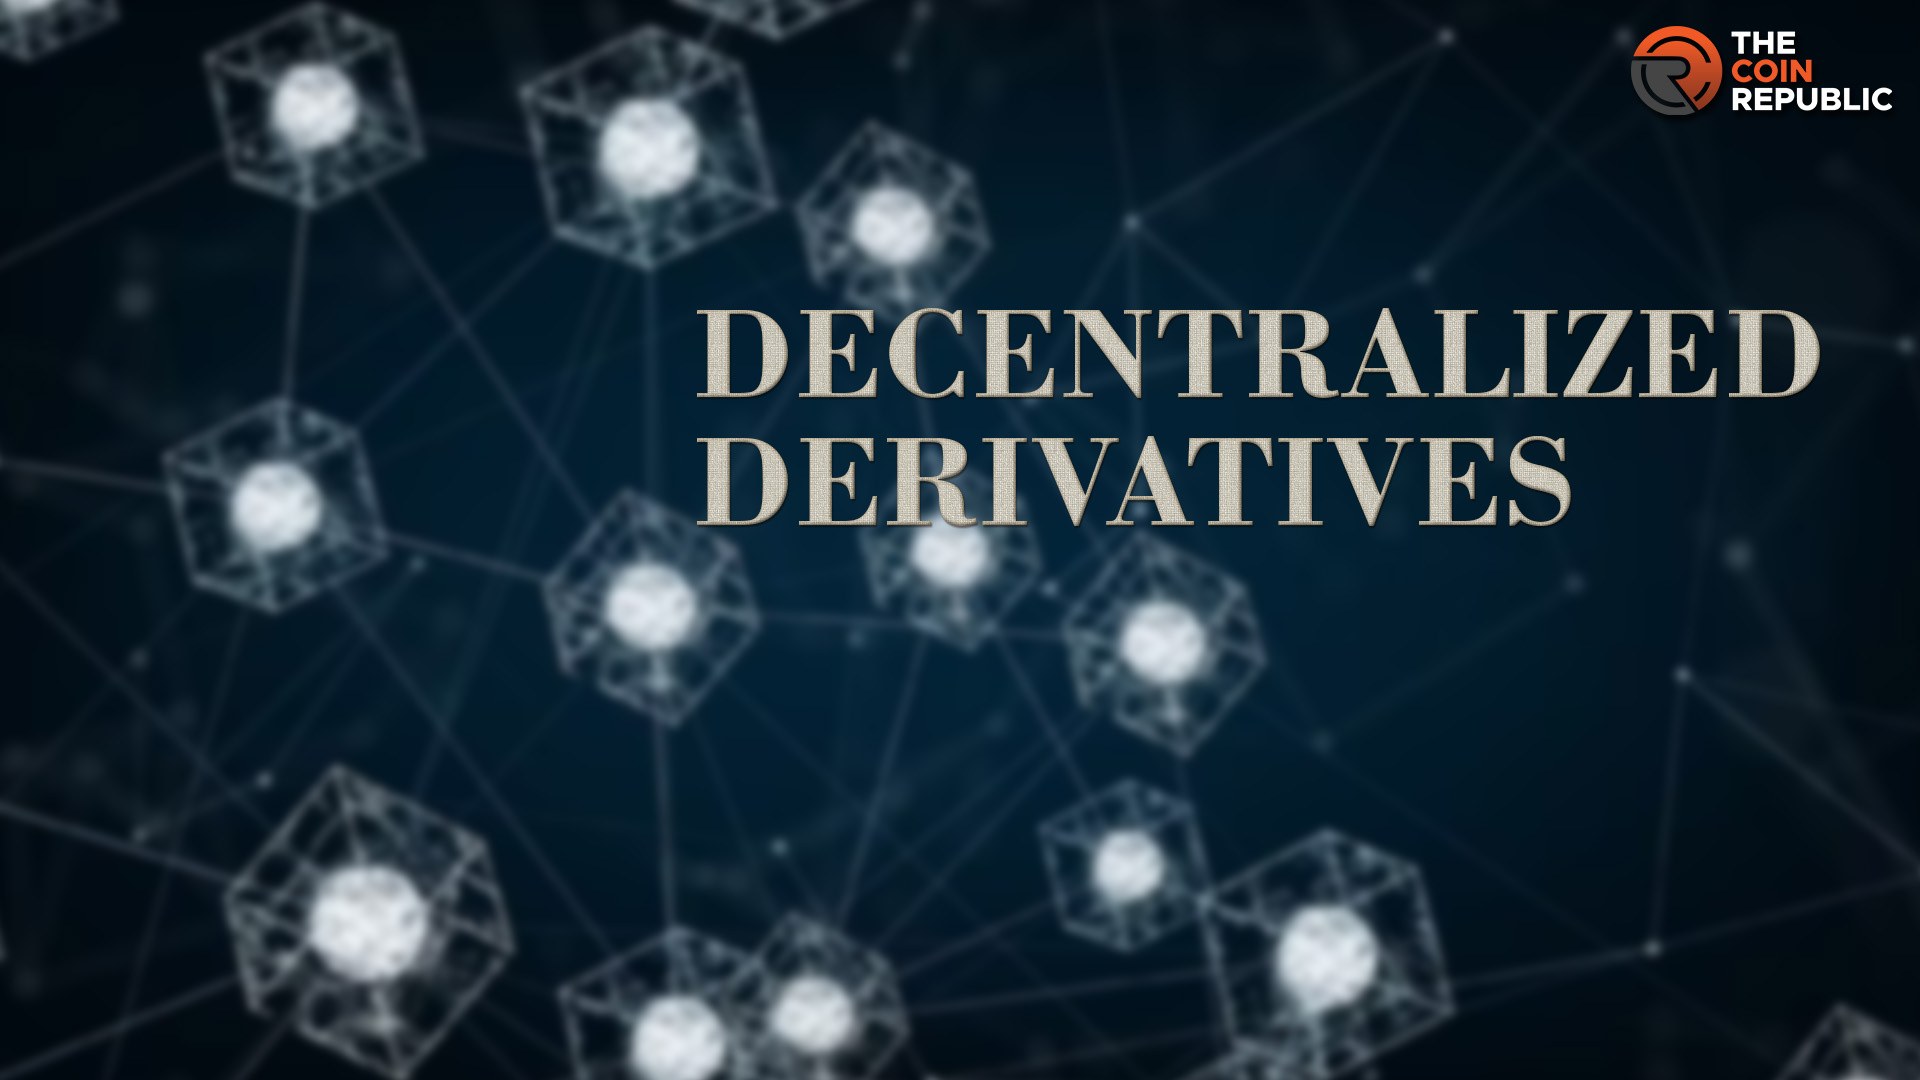 Delve Into the Full-Blown Account of Decentralized Derivatives